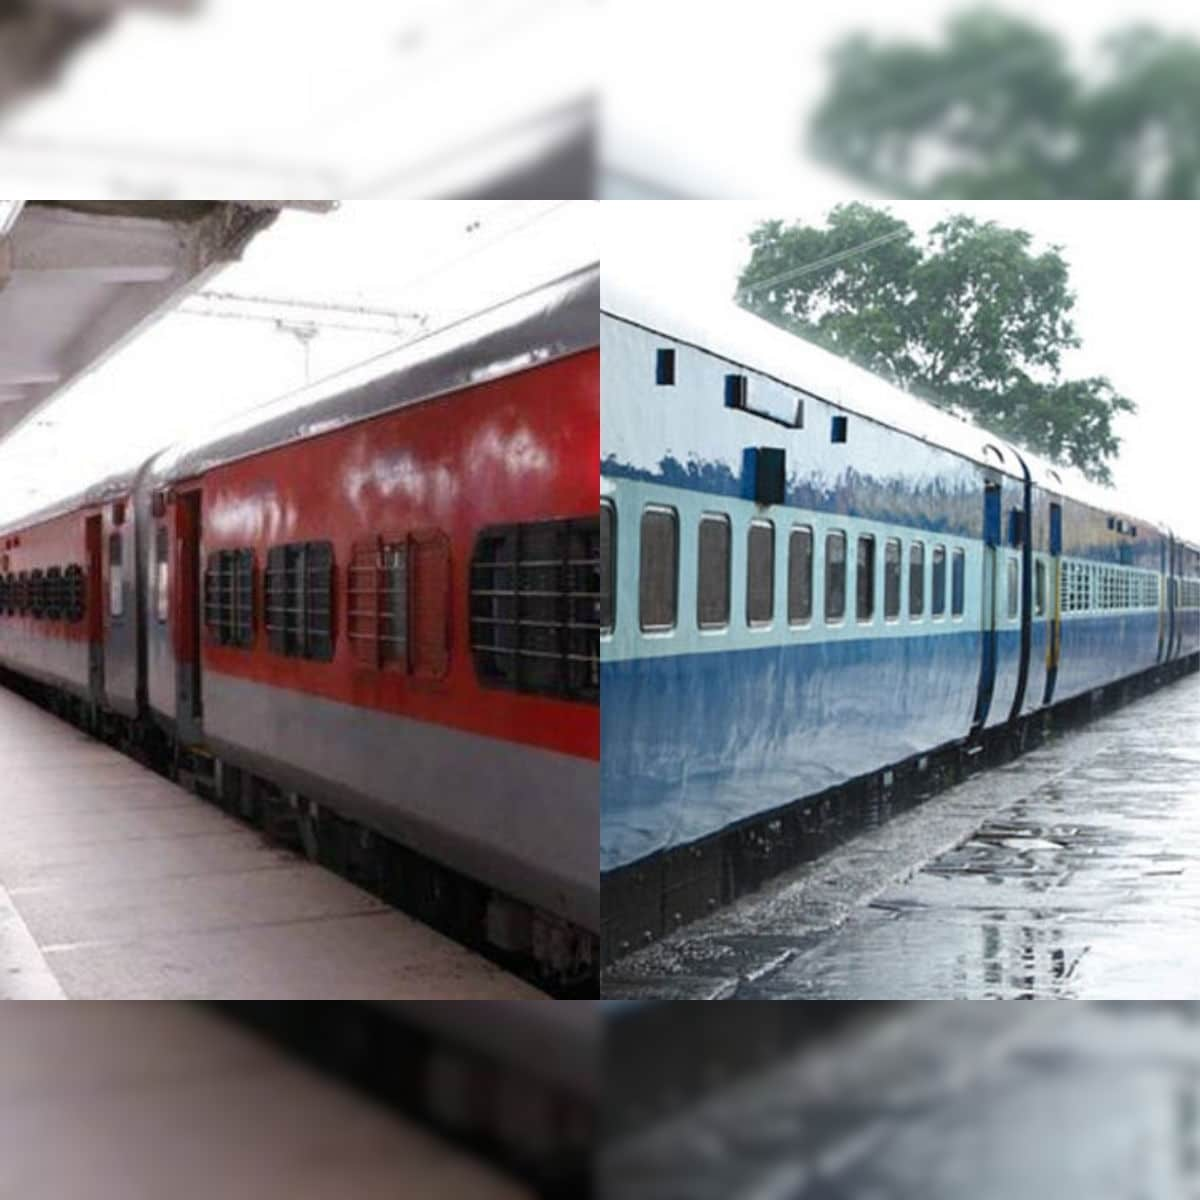 The blue colored coach is called ICF coach and the red colored coach is called LHB coach